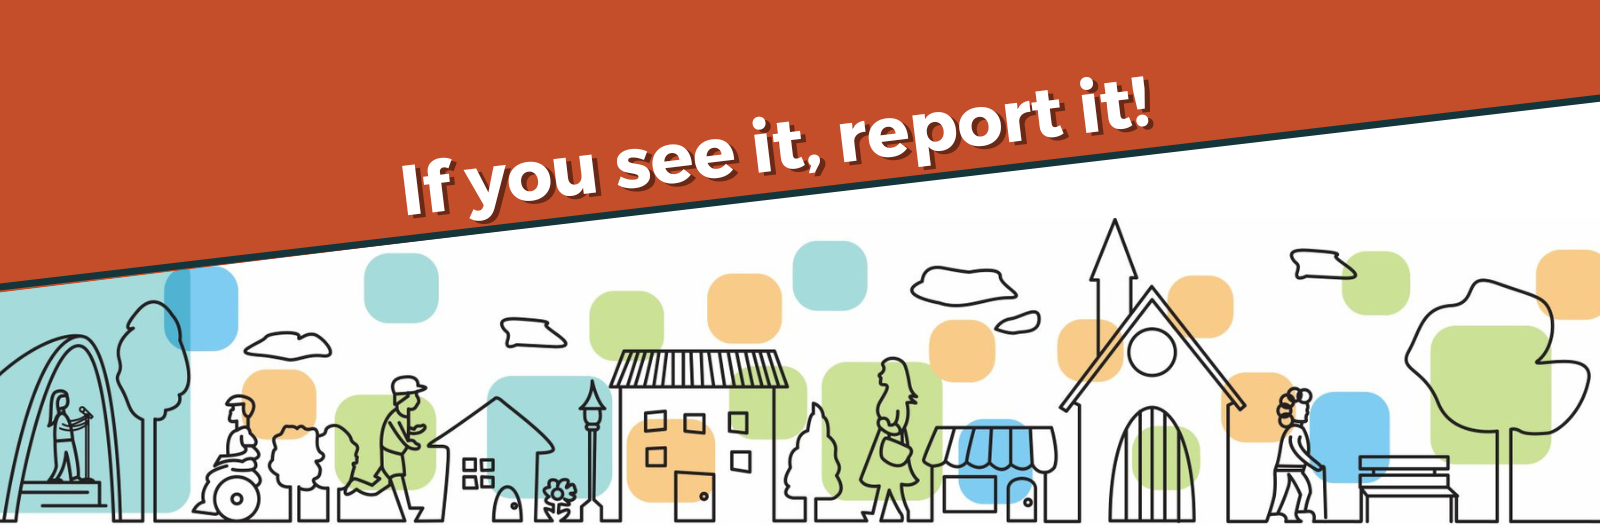 White text on an orange background reads “If you see it, report it!” above a graphic of a neighbourhood. 